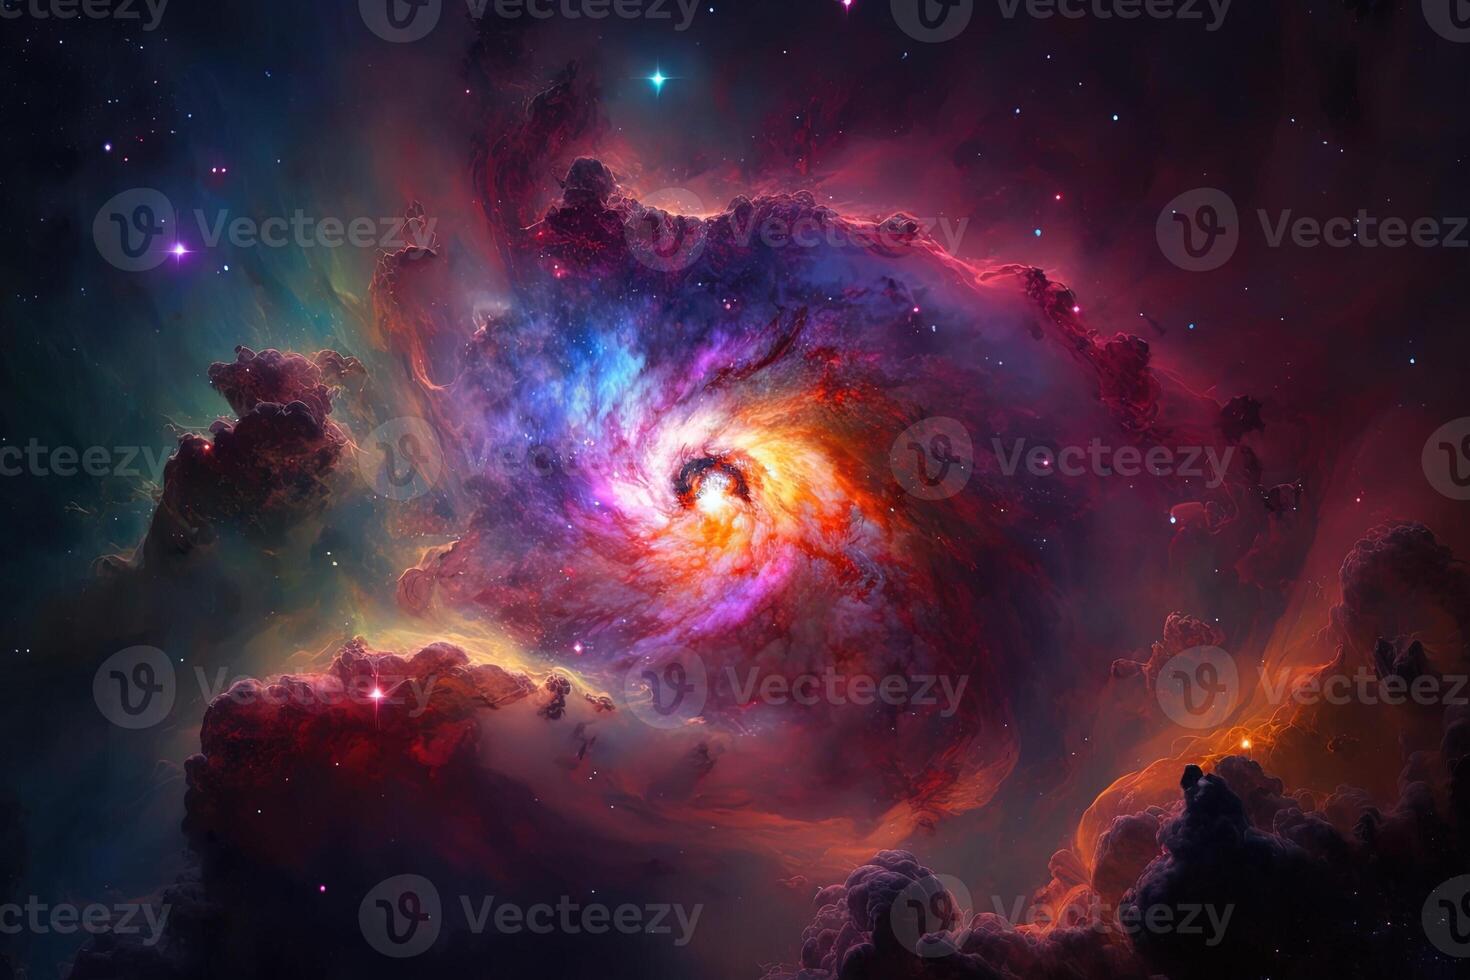 Colorful nebula that resembles a fruit salad, with bright hues of red, orange, green, and purple, all blending illustration photo